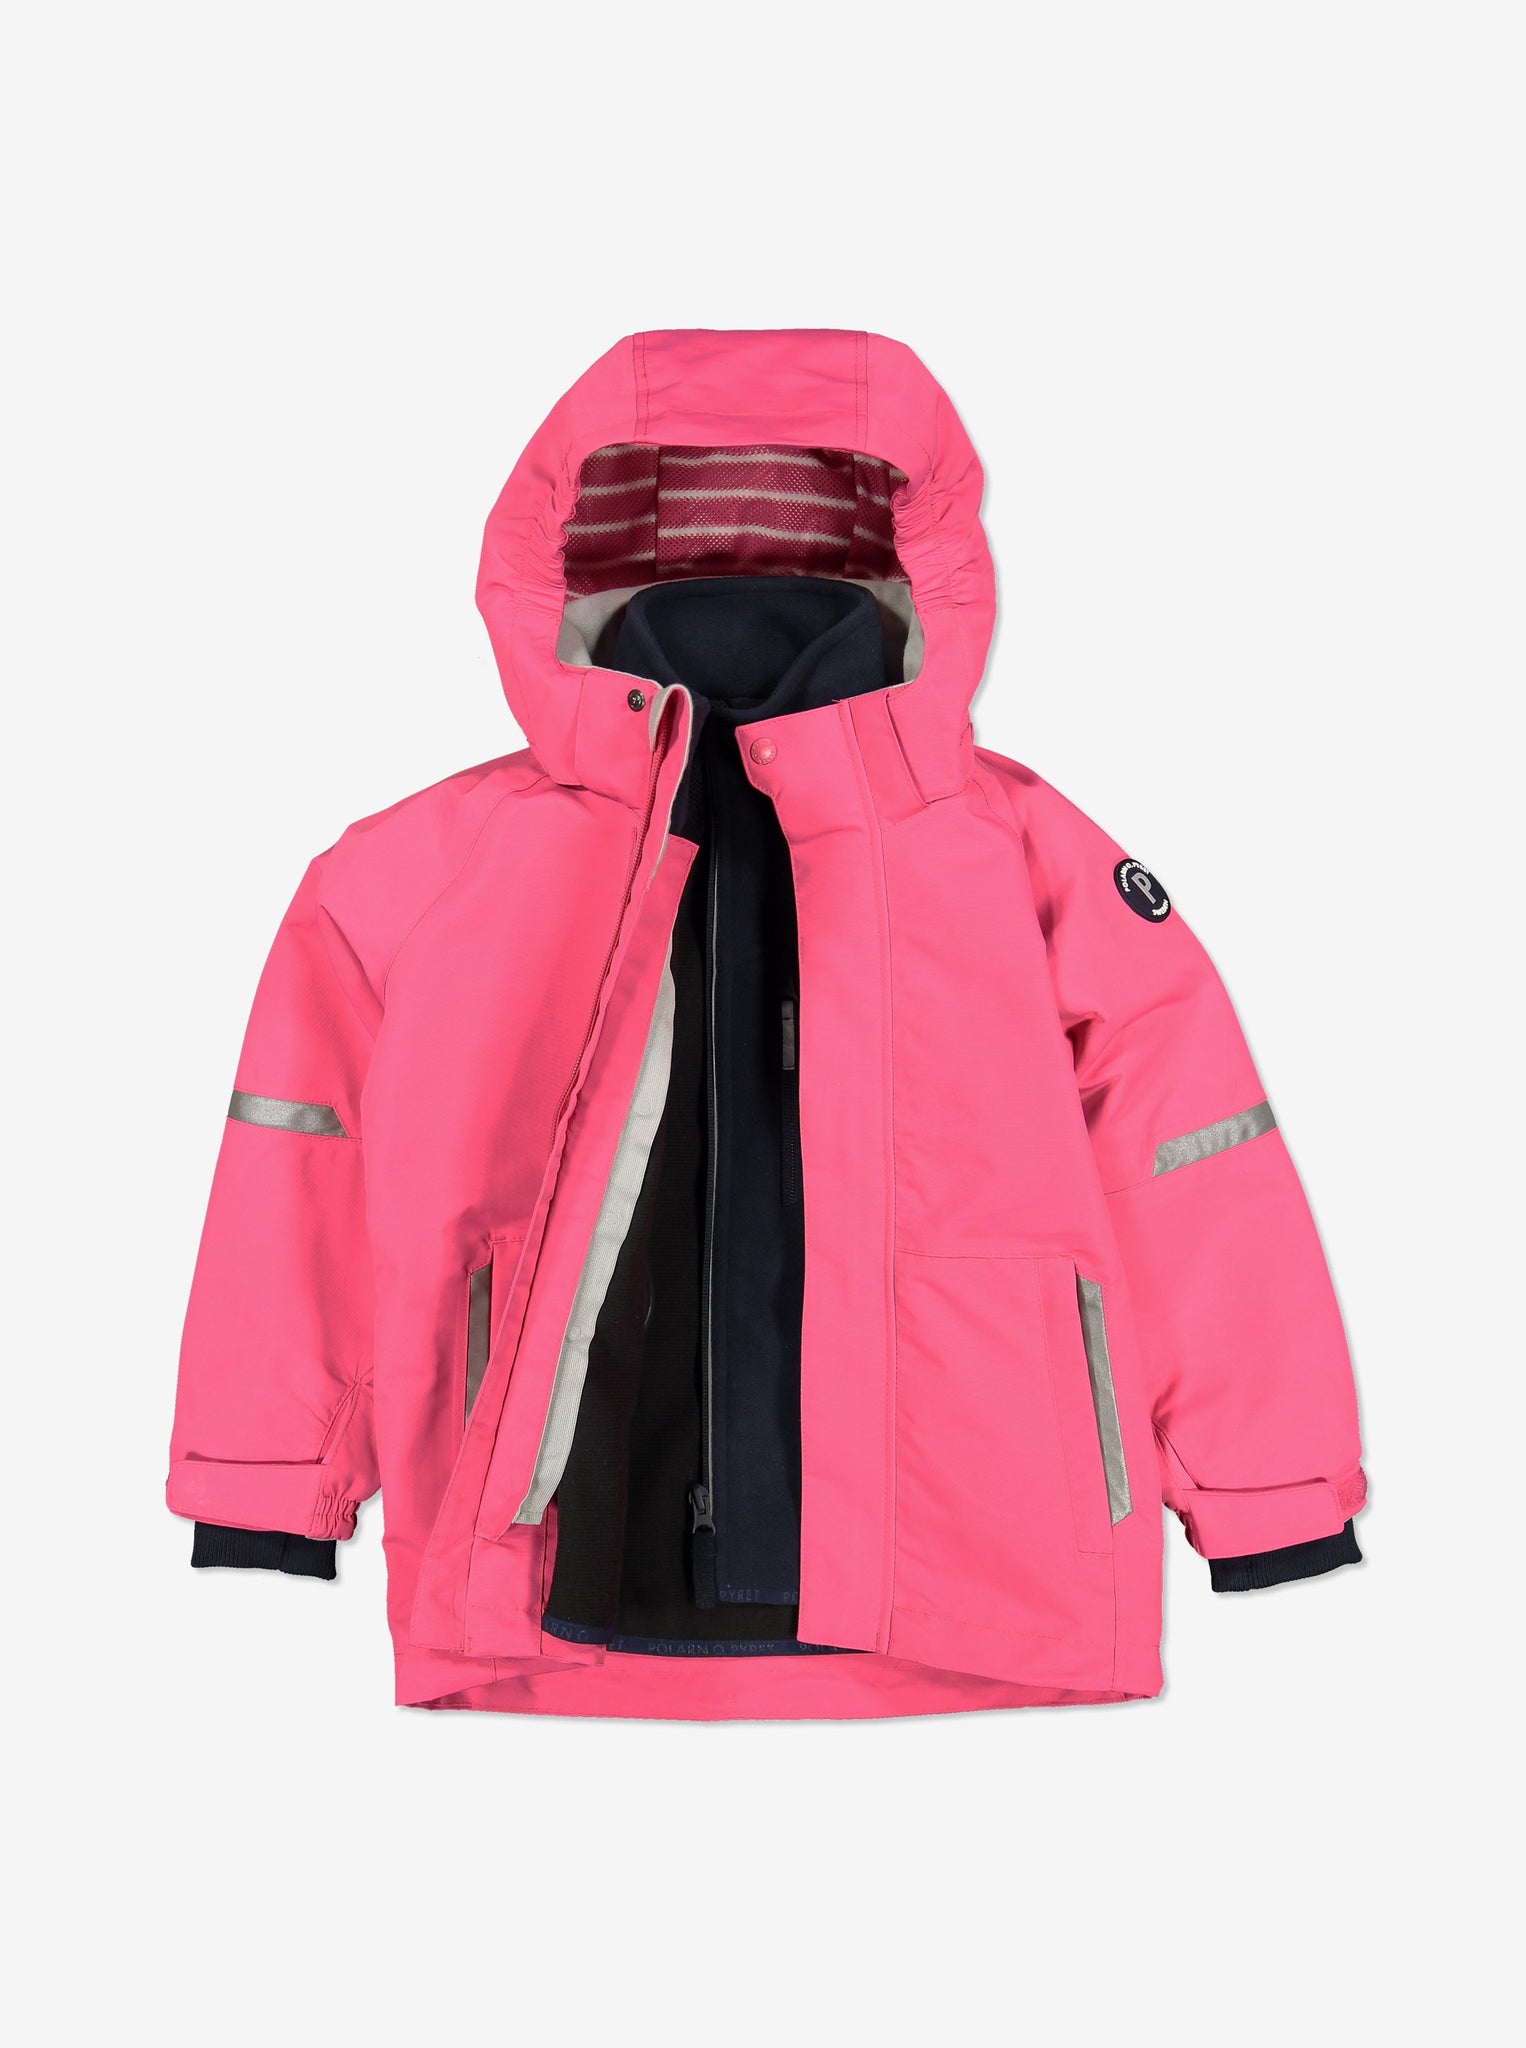 Pink, kids waterproof jacket made of shell fabric, comes with detachable hood, paired with a navy, kids fleece jacket.